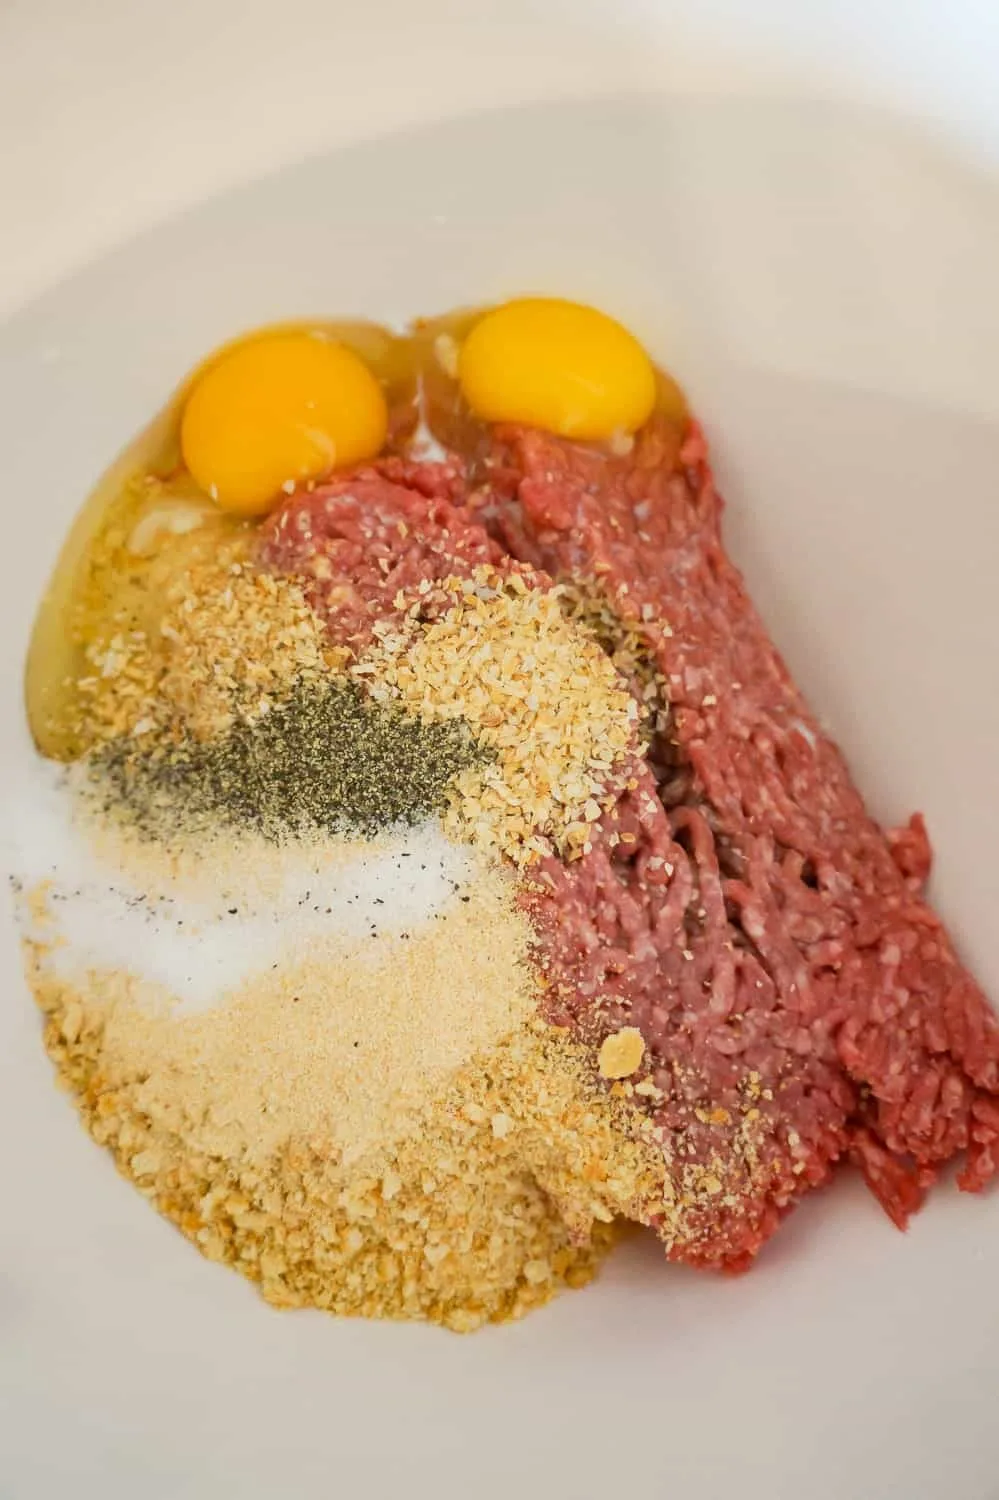 raw ground beef, eggs, Ritz cracker crumbs and spices in a mixing bowl